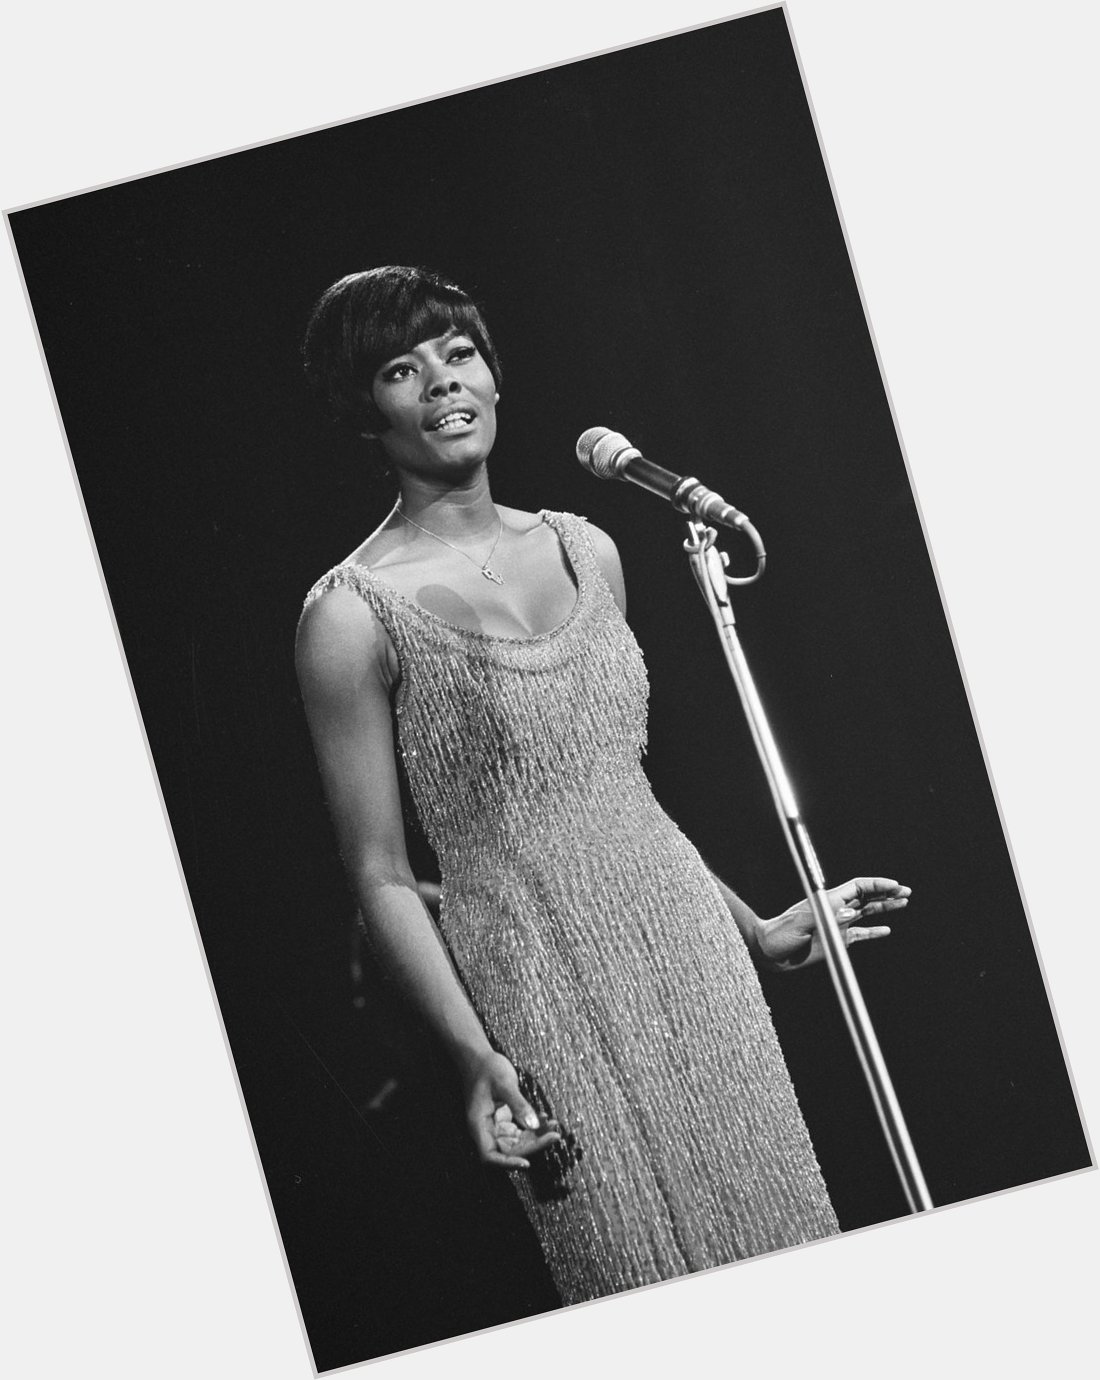 Happy birthday to American singer, actress, television host Dionne Warwick, born December 12, 1940. 